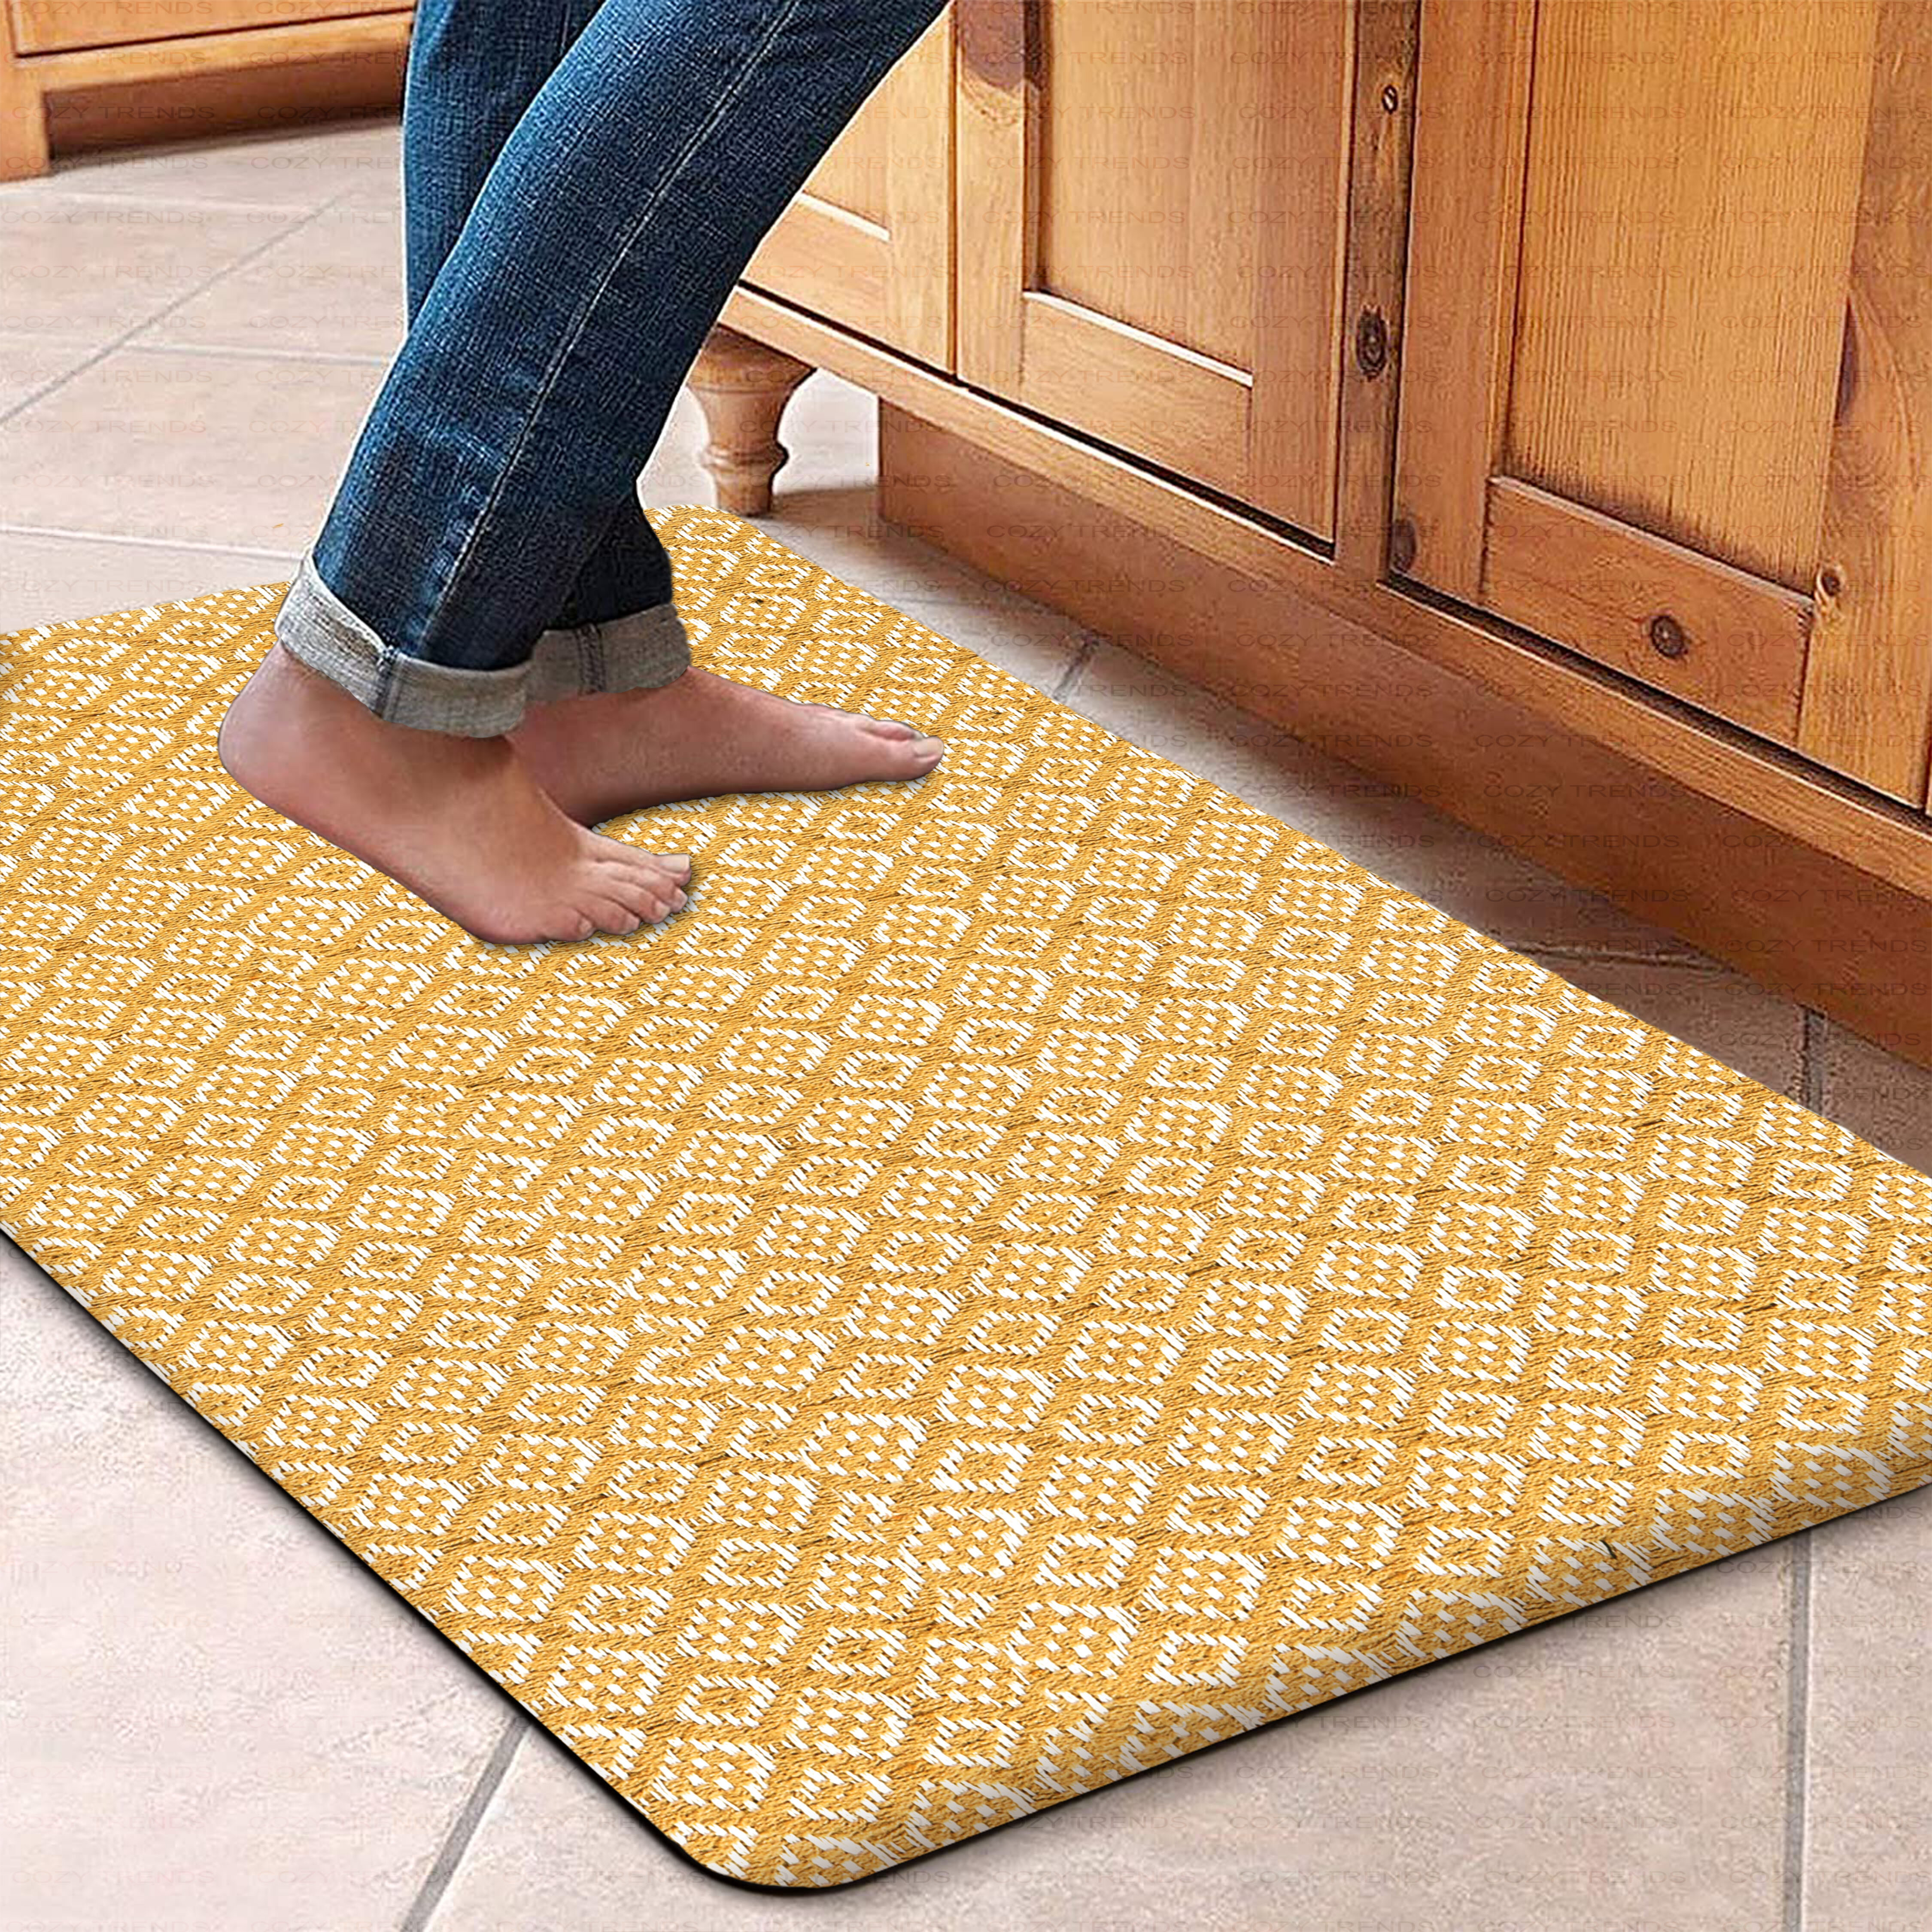 Abstract Kitchen Mats for Floor Cushioned Anti Fatigue 2 Piece Set Kitchen  Runner Rugs Non Skid Washable Geometric 